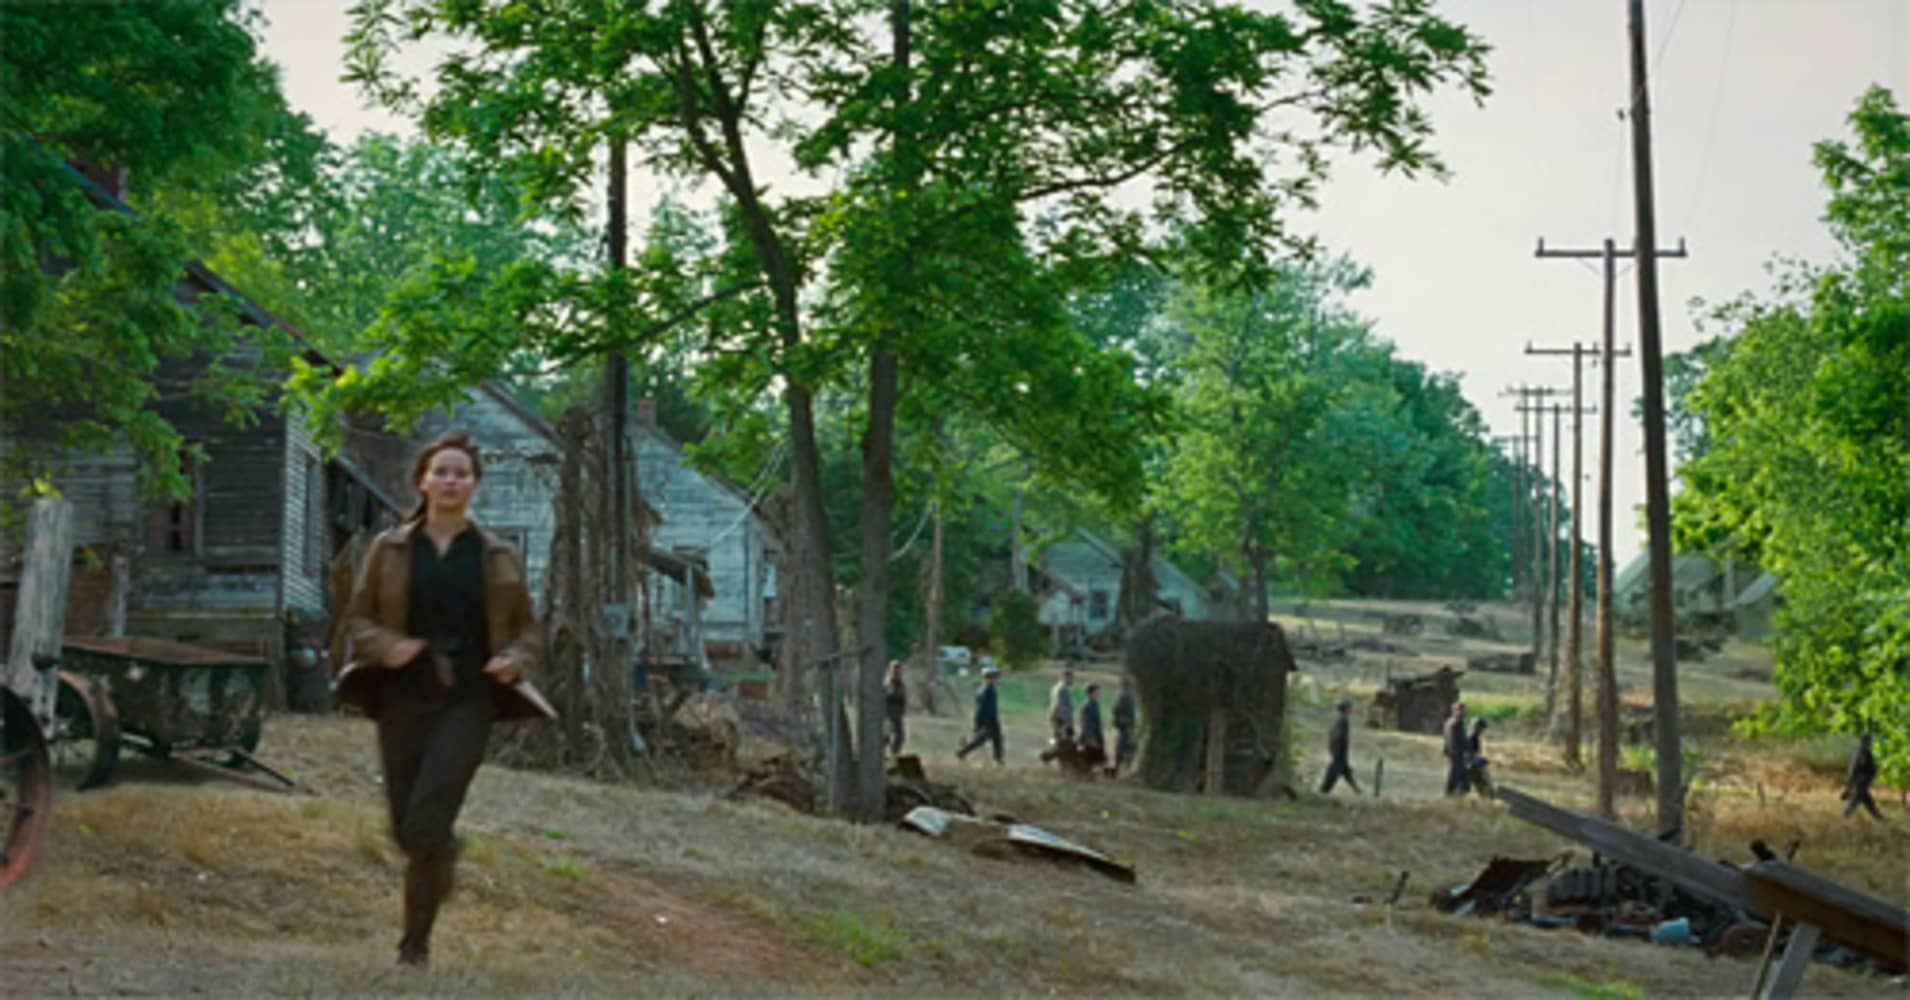 Hunger Games: District 12 town up for sale